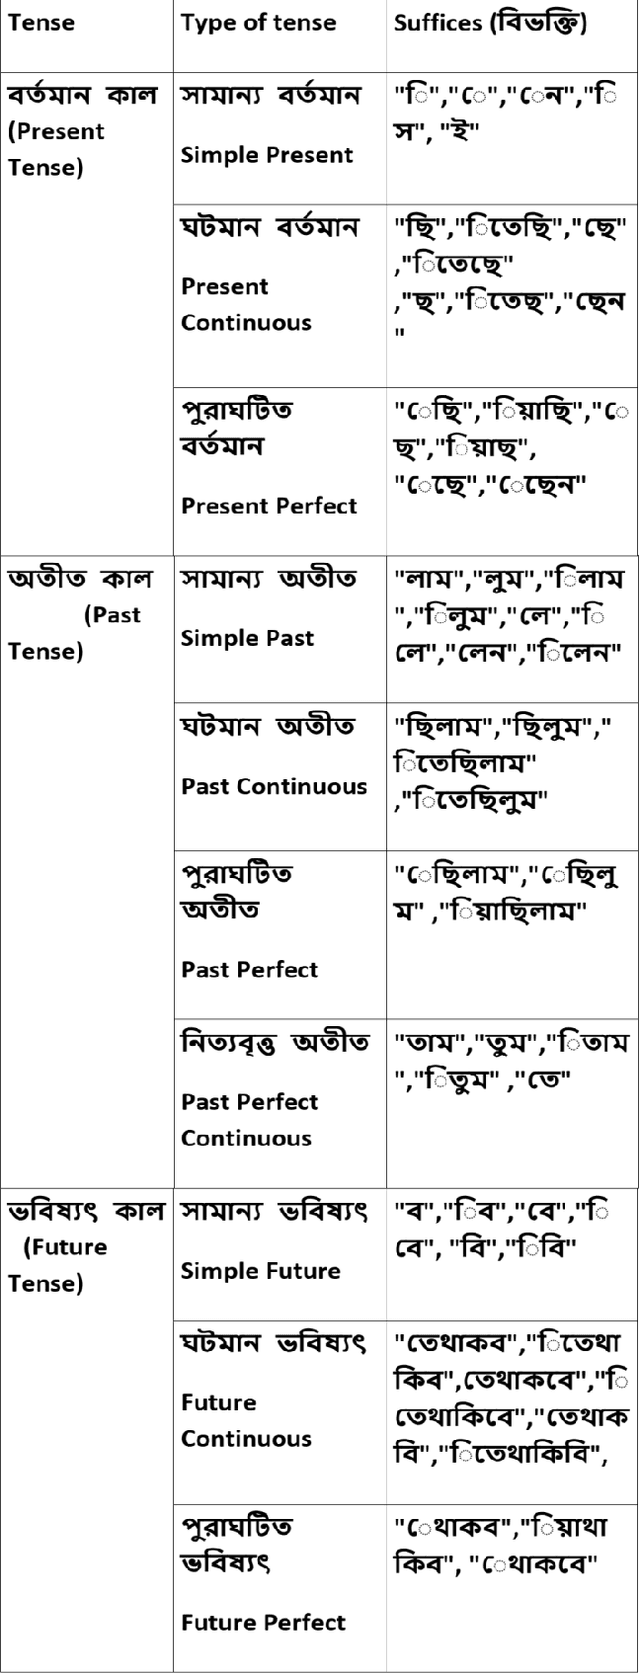 Figure 4 for A Novel Approach to Enhance the Performance of Semantic Search in Bengali using Neural Net and other Classification Techniques